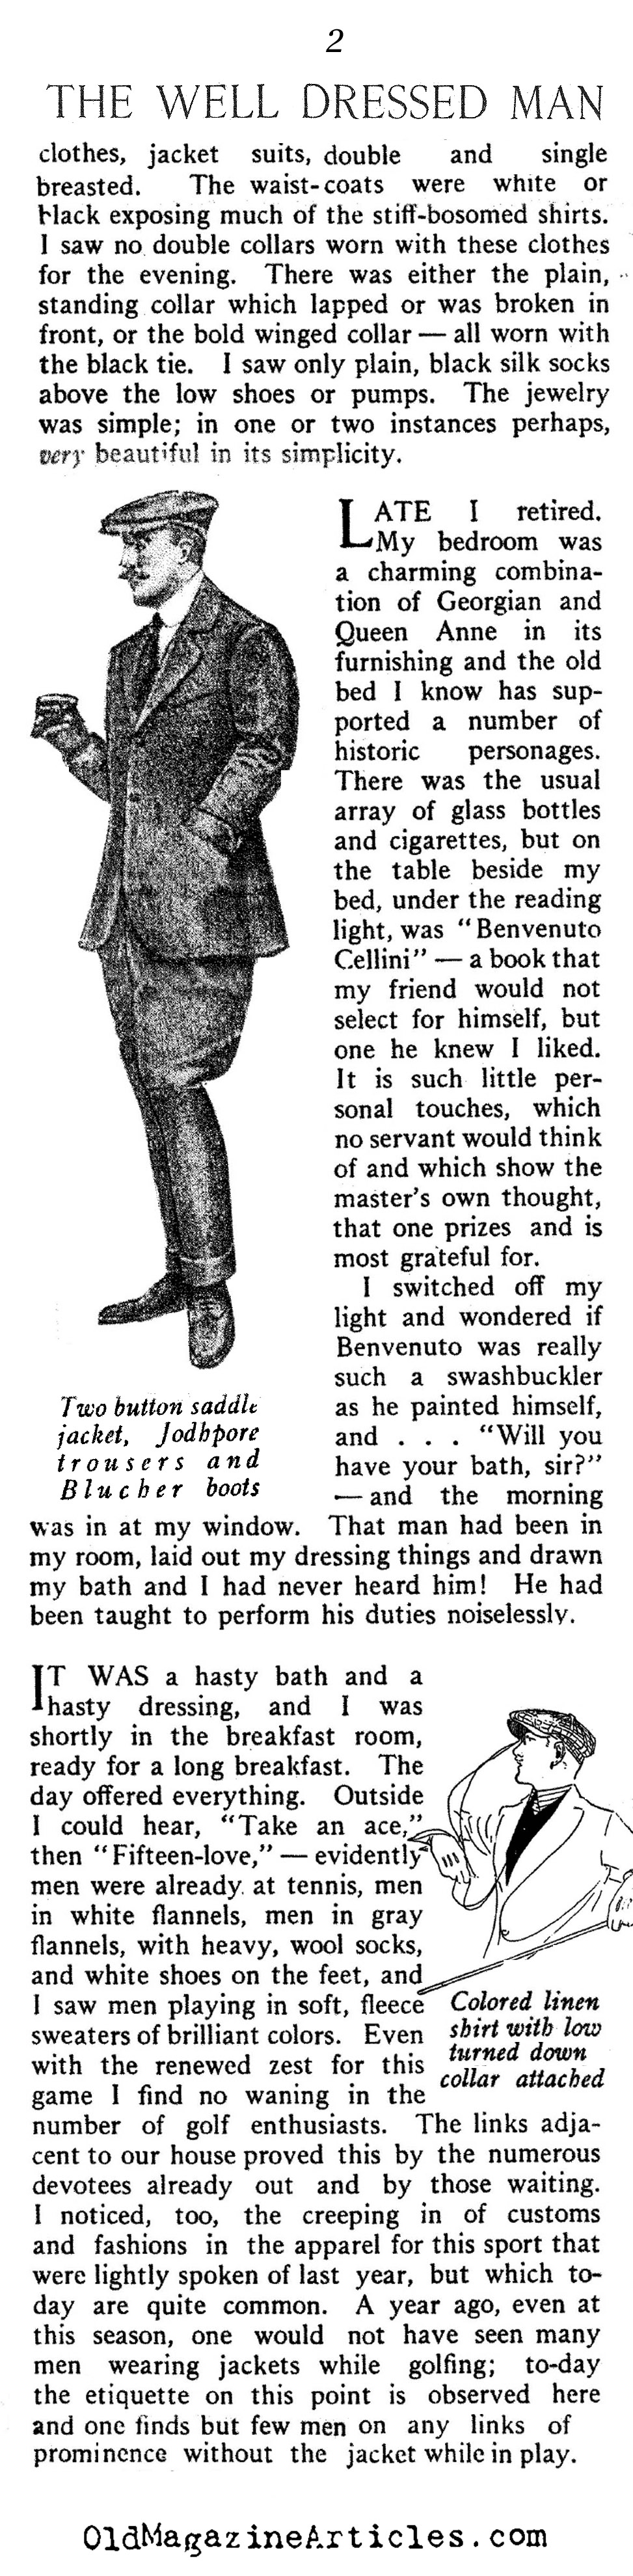 Shooting Tweeds, Riding Breeches  and Evening Clothes<BR> (Dress & Vanity Fair, 1913)